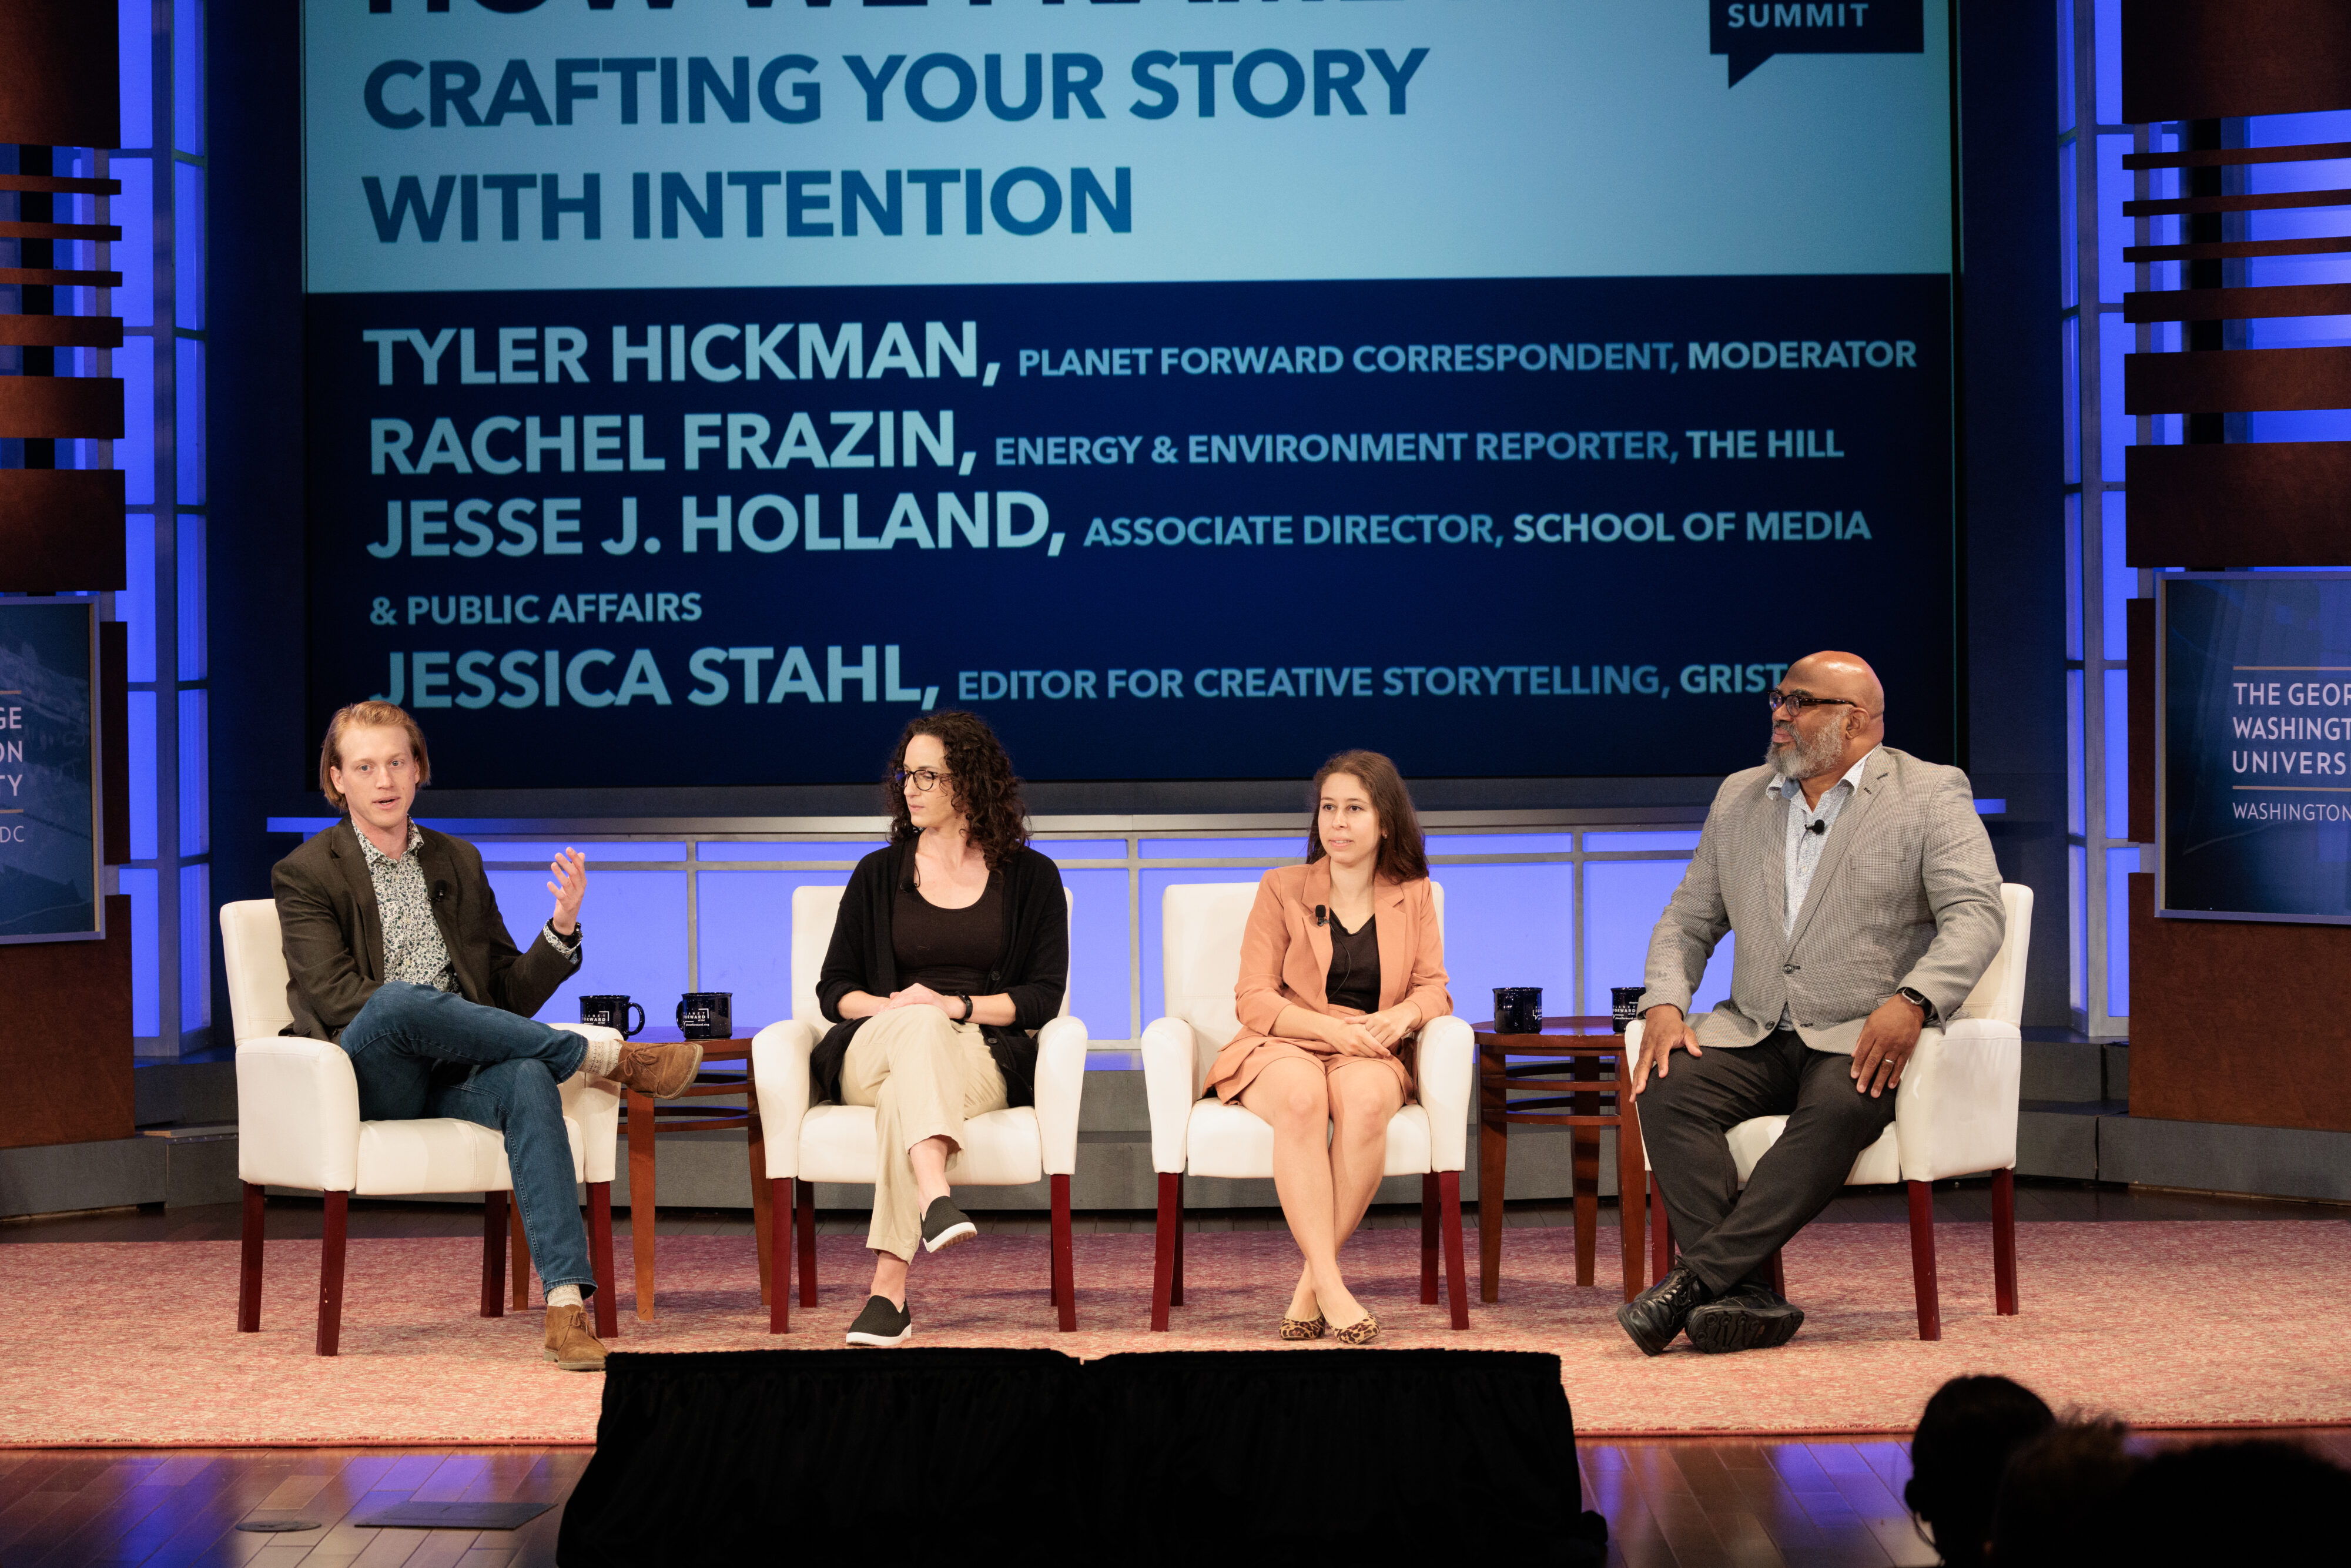 (From left to right) Tyler Hickman, University of Colorado Boulder; Jessica Stahl, Editor for Creative Storytelling, Grist; Rachel Frazin, Energy & Environment Reporter, The Hill; and Jesse J. Holland, Associate Director SMPA; discuss the future of environmental journalism. 